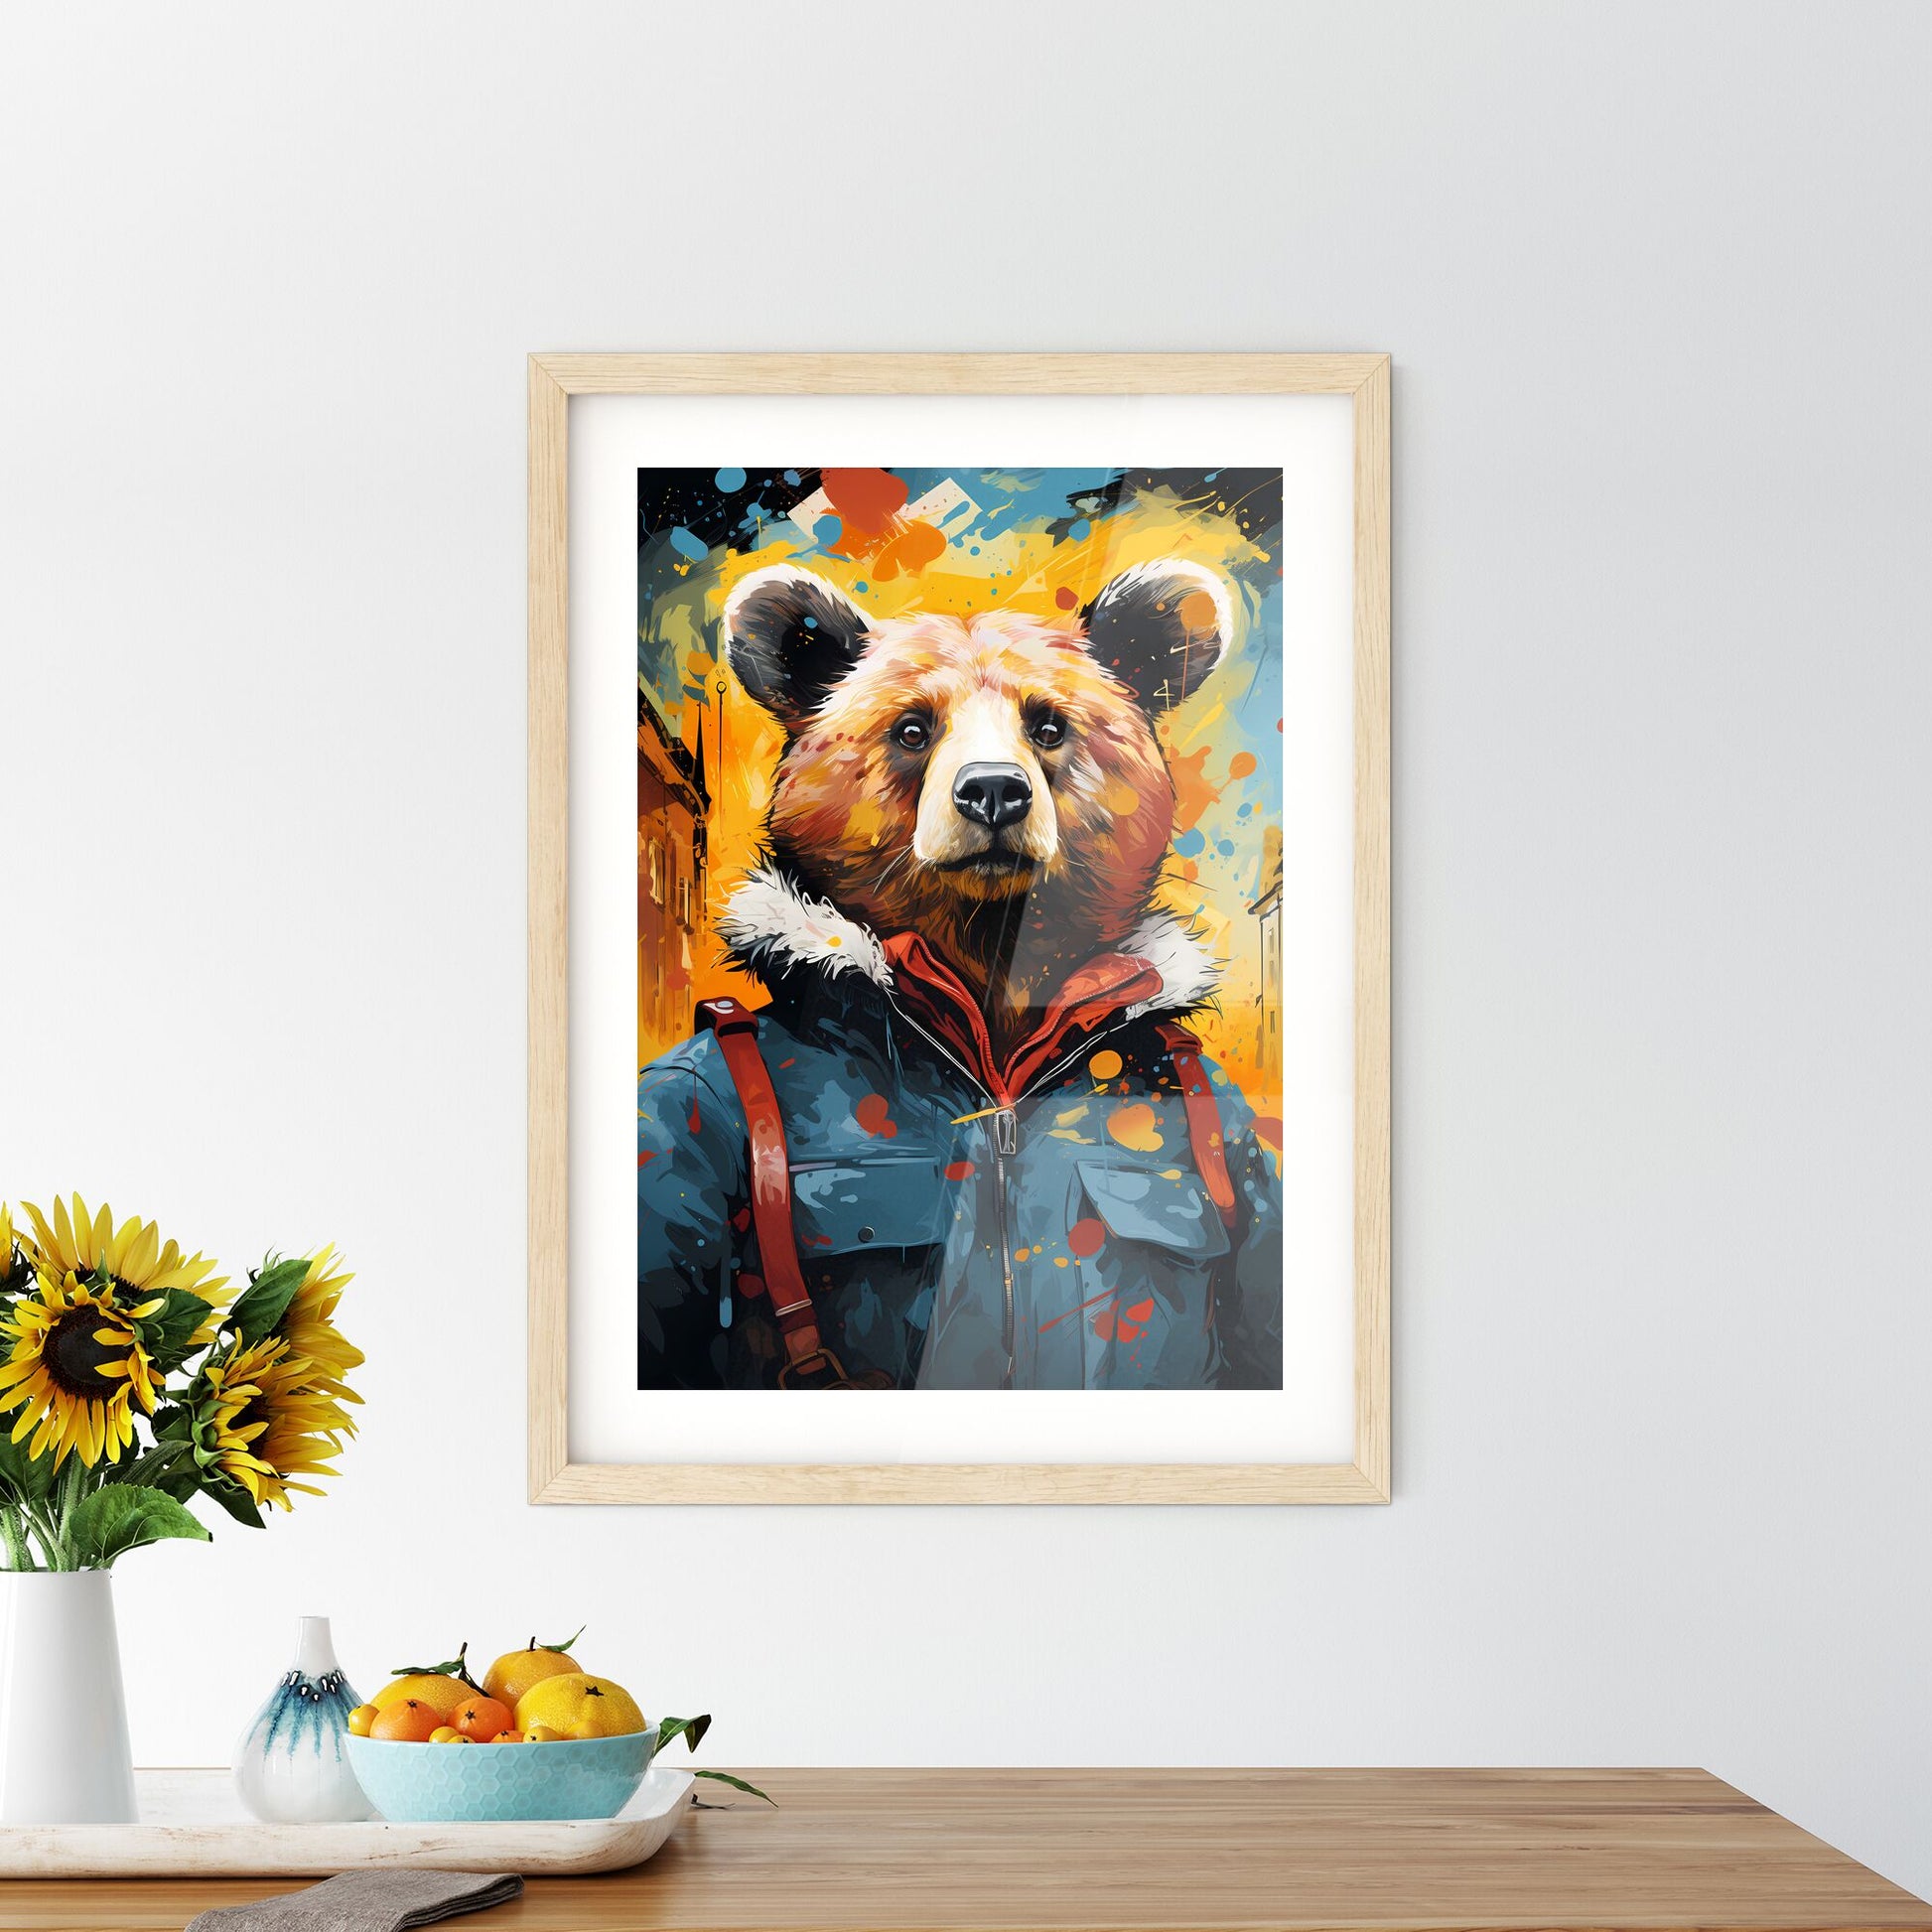 Berlin Mascot Bear In Front Of The City Skyline - A Painting Of A Bear Wearing A Jacket Default Title